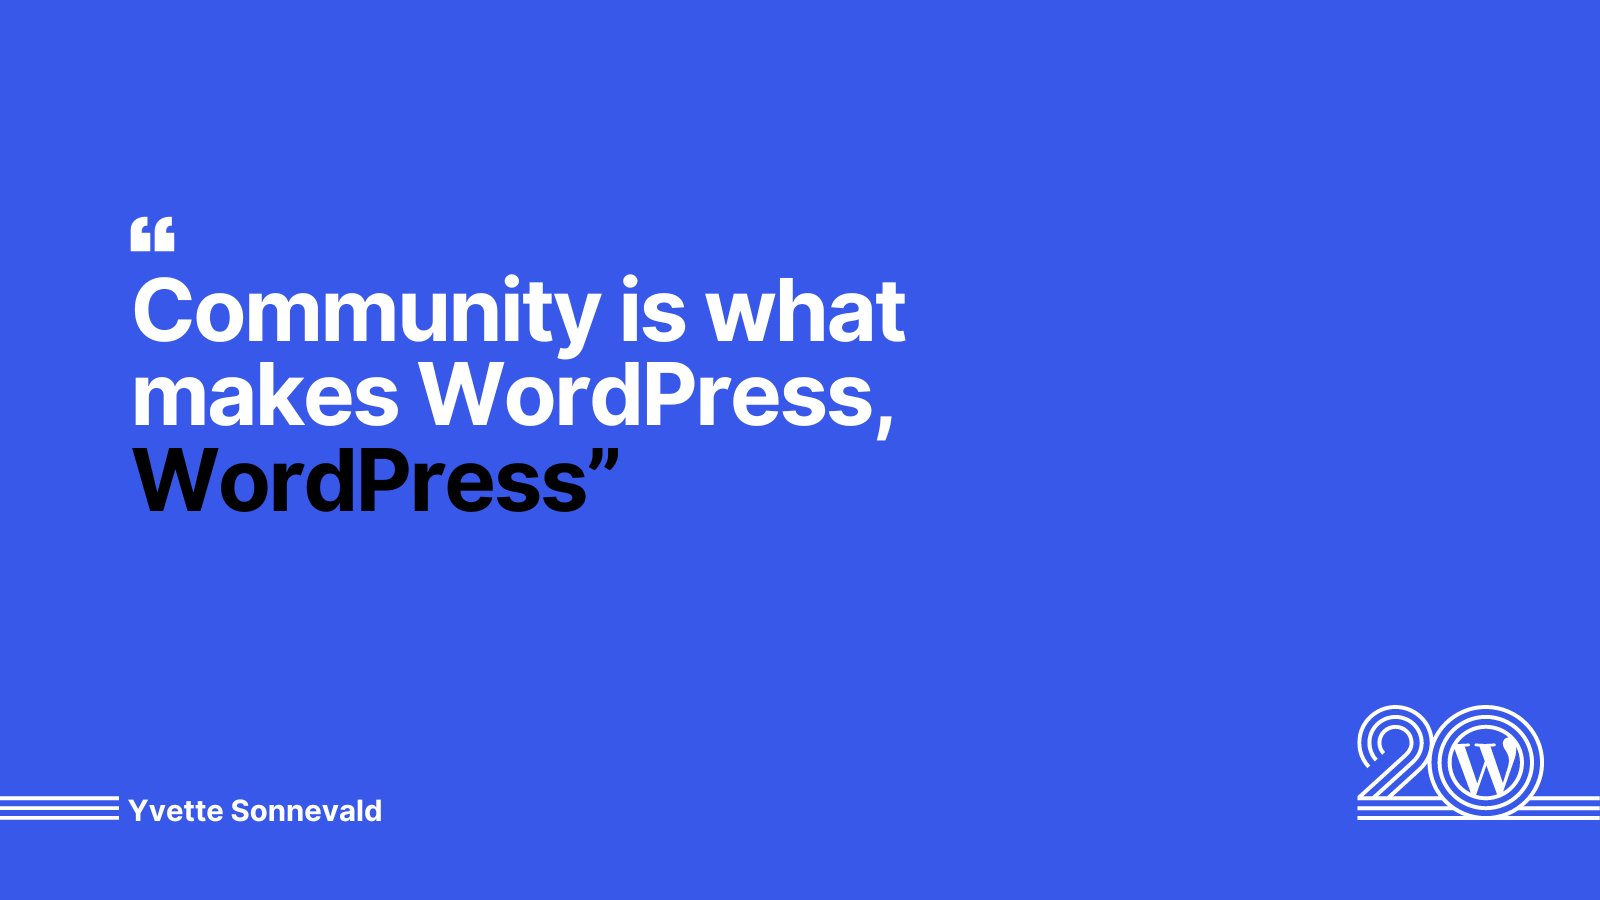 Blue background with white and dark blue text that reads: "Community is what makes WordPress, WordPress" - Yvette Sonnevald